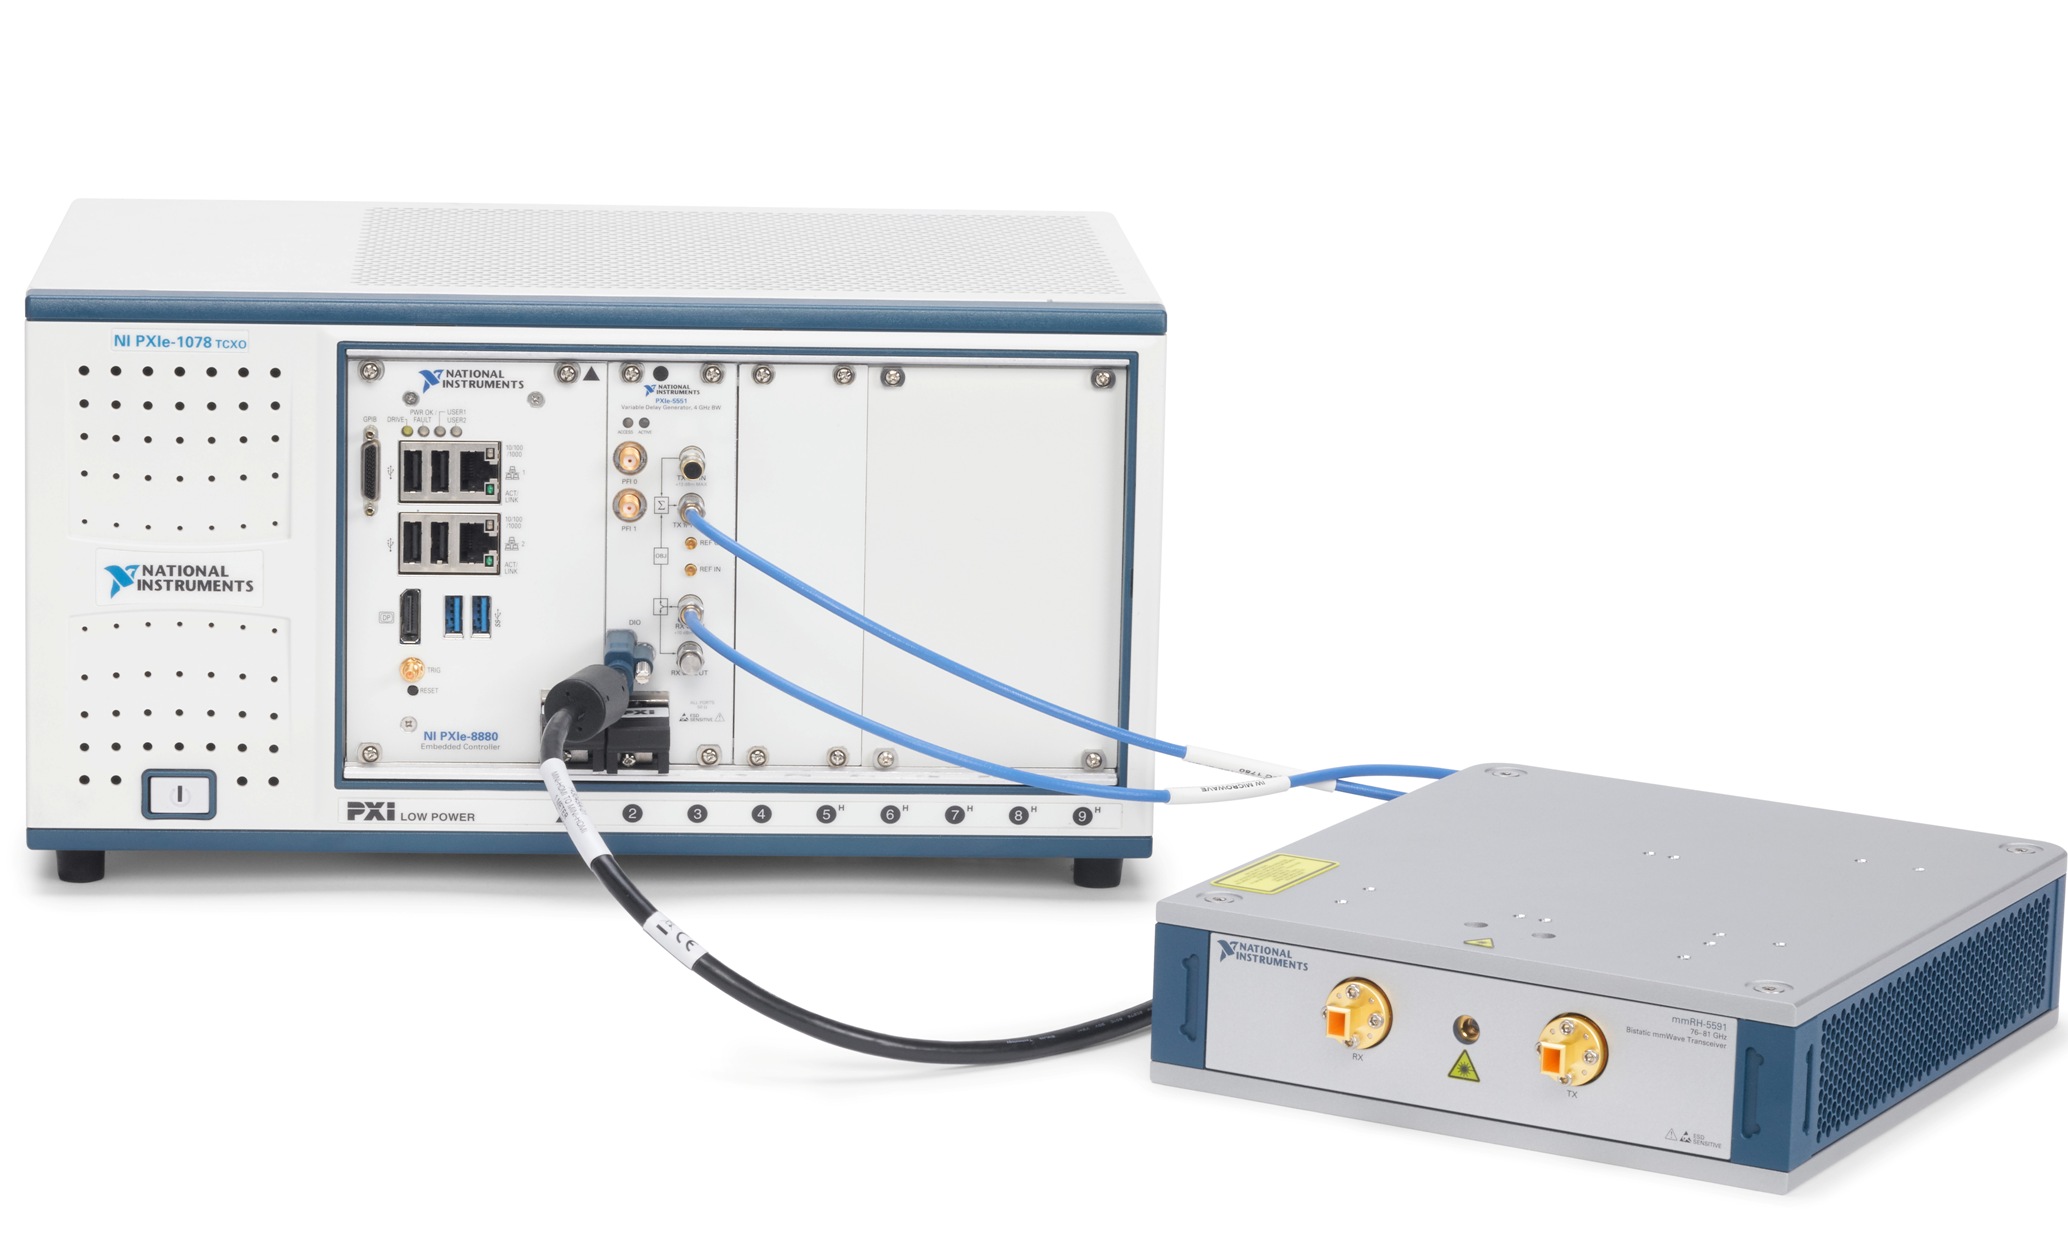 HIL System for EV and the Vehicle Radar Test Systems fit into the full National Instruments test platform